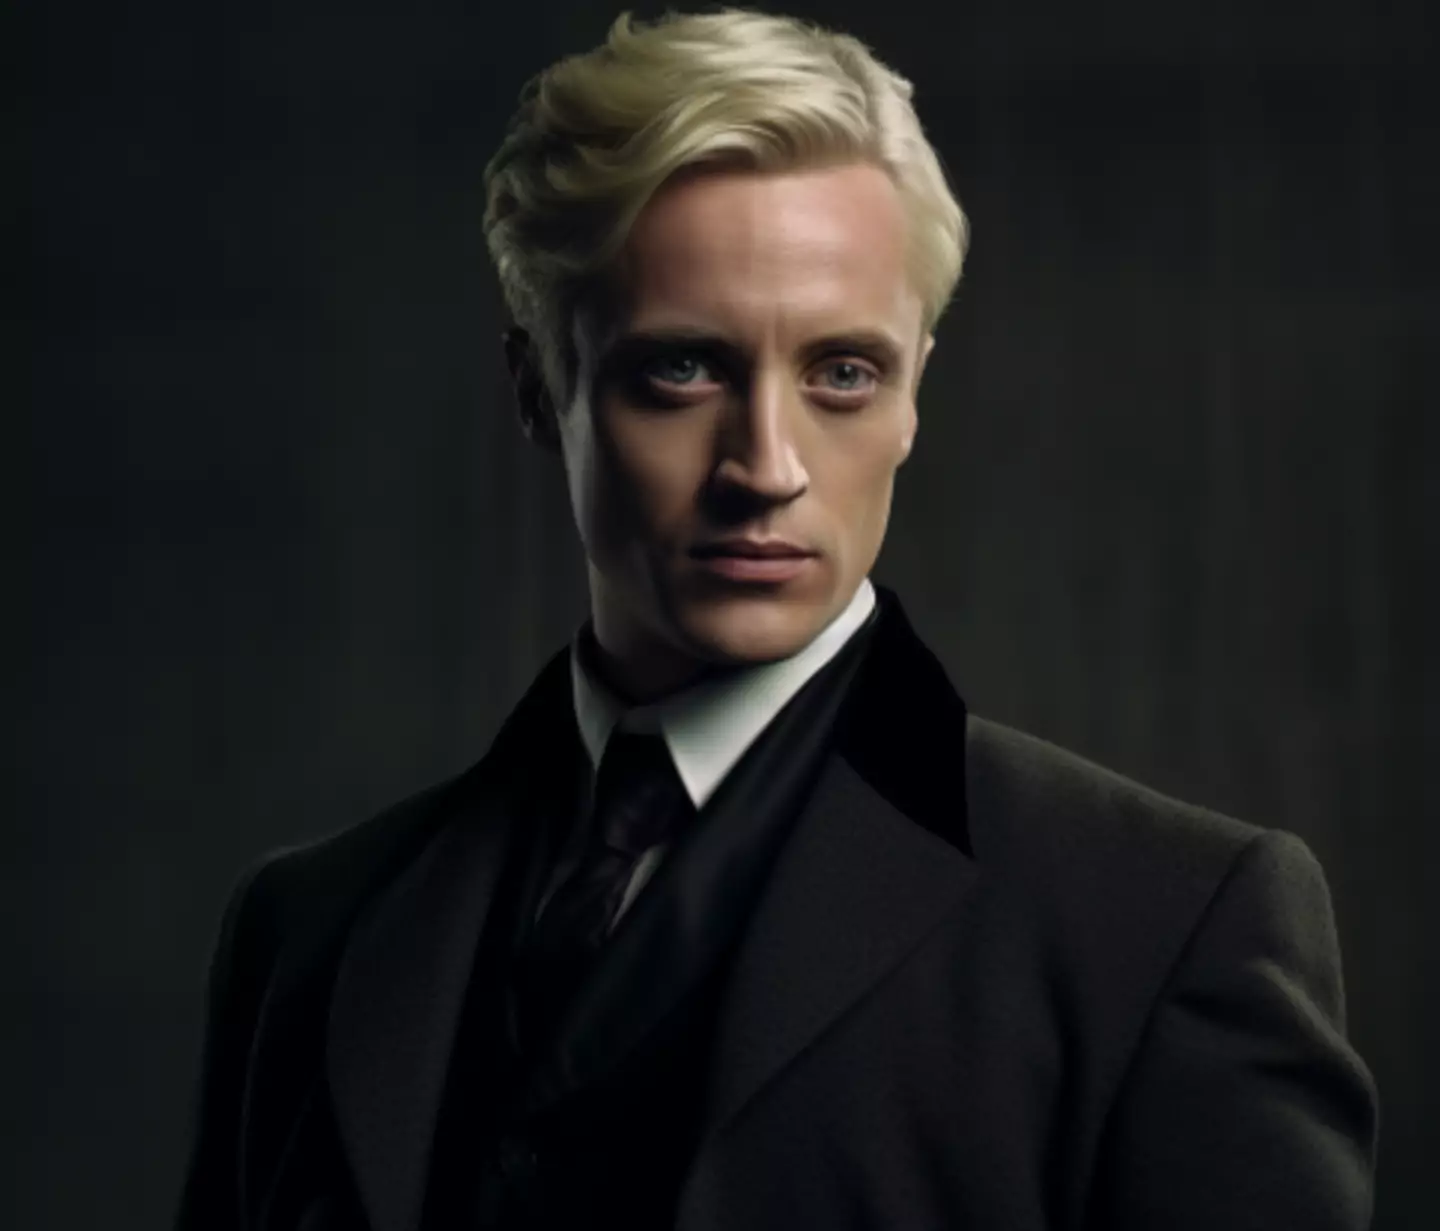 Draco hasn't followed in his dad's footsteps when it comes to hairstyles.